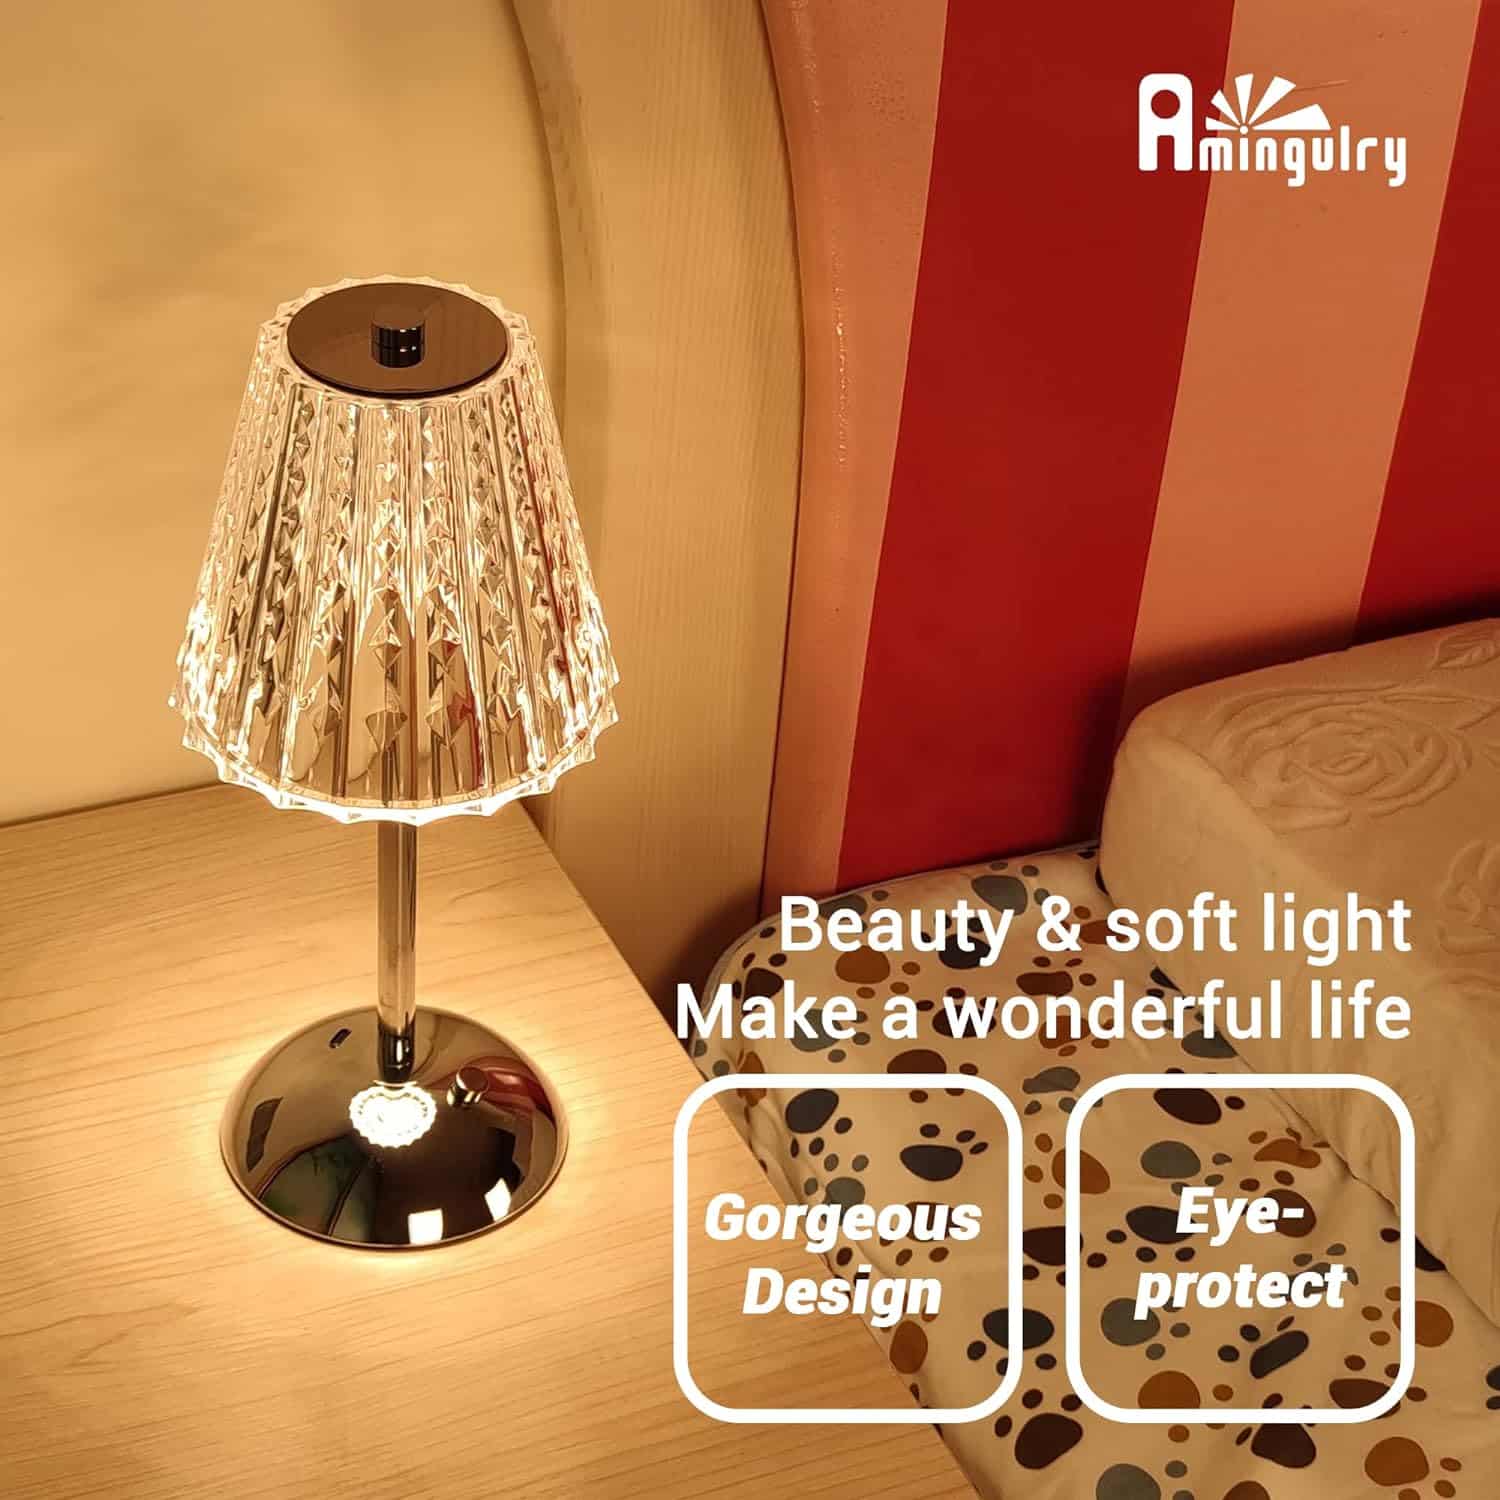 Amingulry Cordless Table Lamp, Rechargeable Battery Operated Lamp, 3 Color Modes  Stepless Dimmable LED Touch Lamp, Portable Crystal Gold Metal Beside Lamps for Bedroom Living Room Restaurant Outdoor